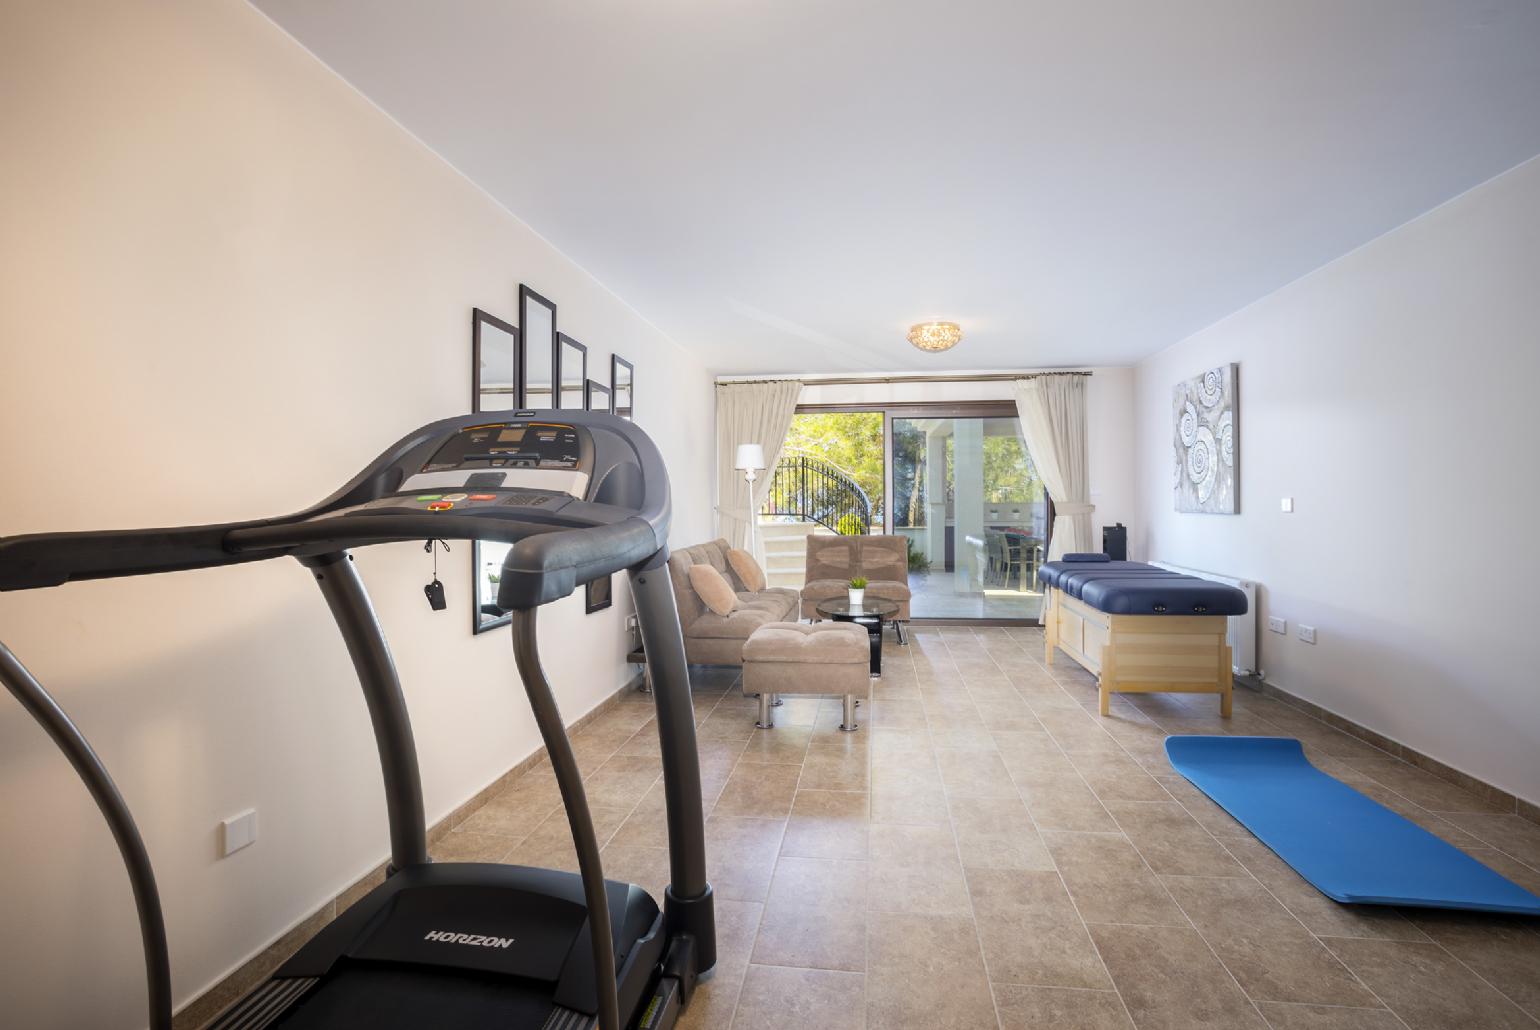 Living area with gym equipment and massage table